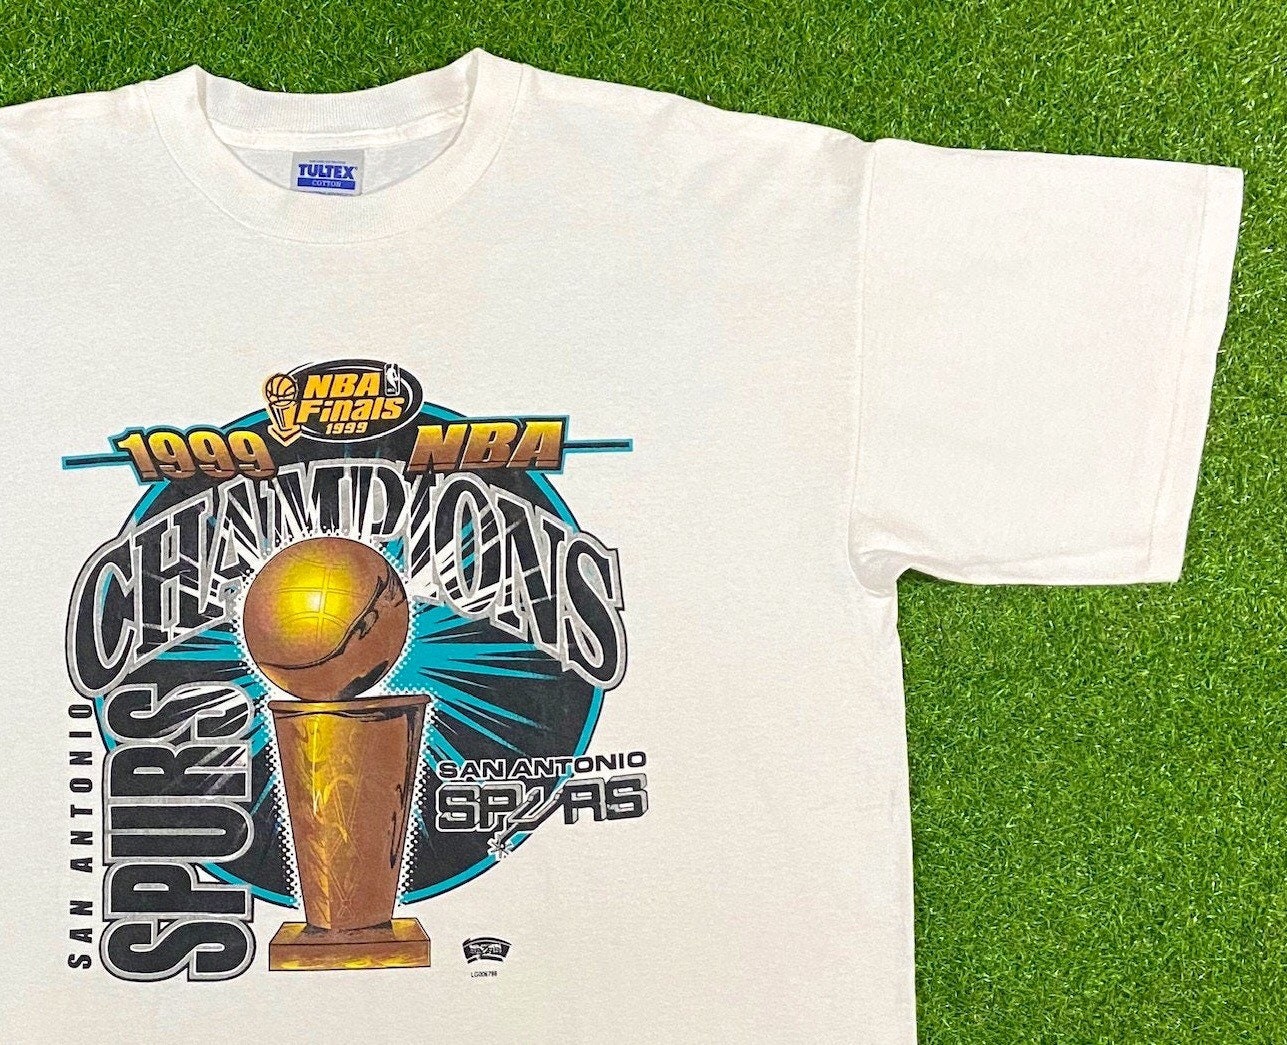 2023 NBA Finals Champions San Antonio Spurs t-shirt by To-Tee